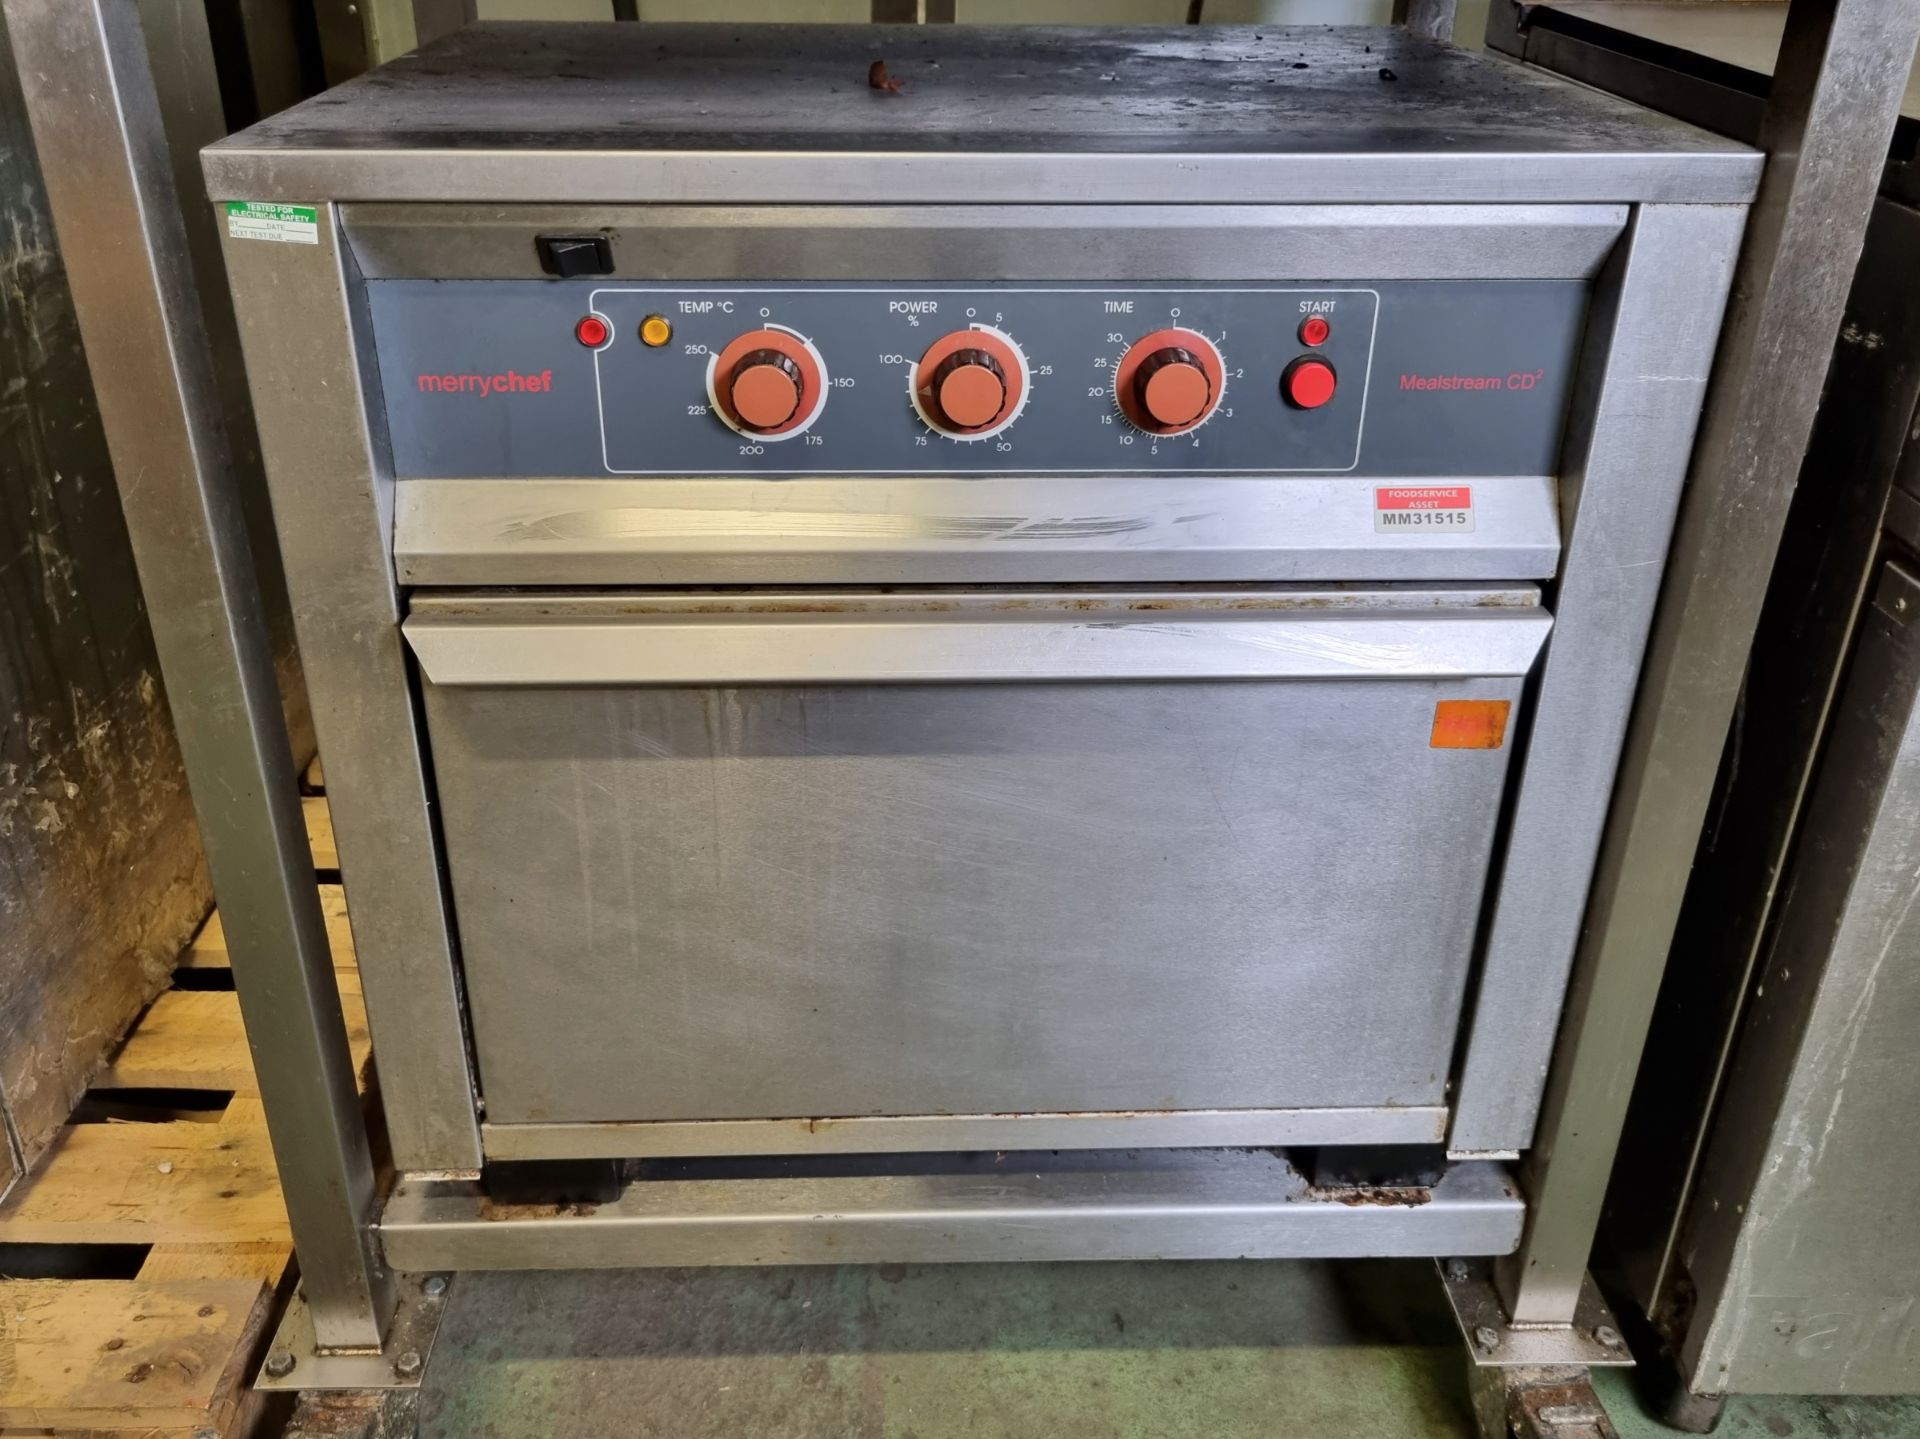 Merrychef CTM3-CD2 combination oven with trolley - W 880 x D 730 x H 1020mm - Bild 3 aus 5